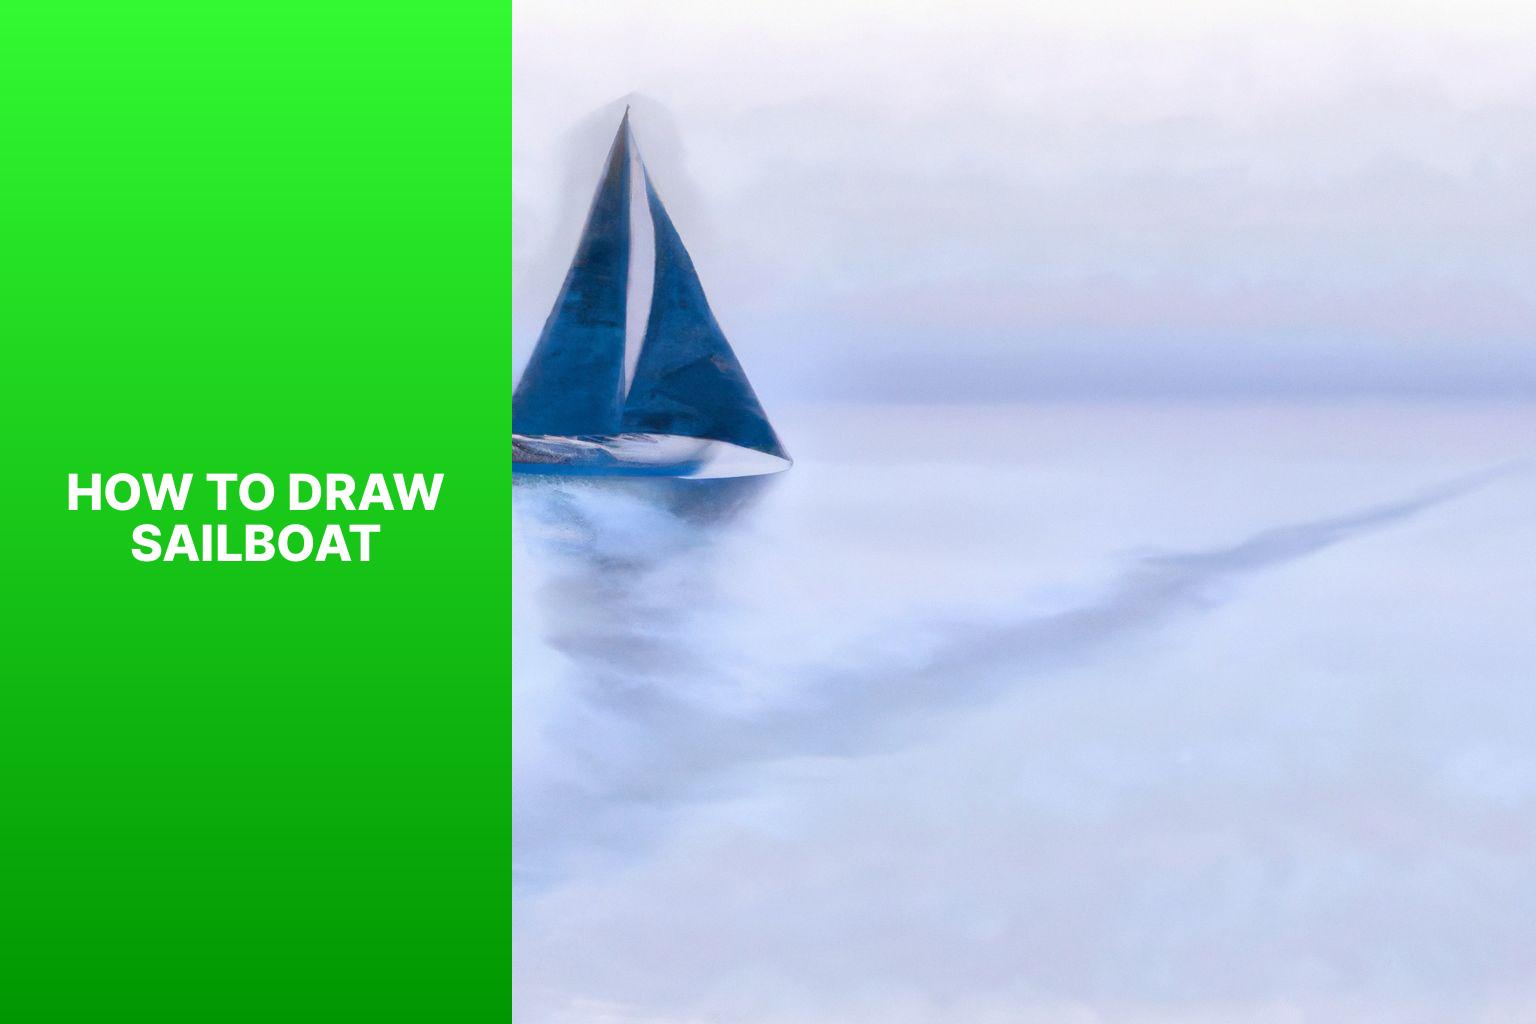 Learn How To Draw a Sailboat: Step-by-Step Guide for Beginners